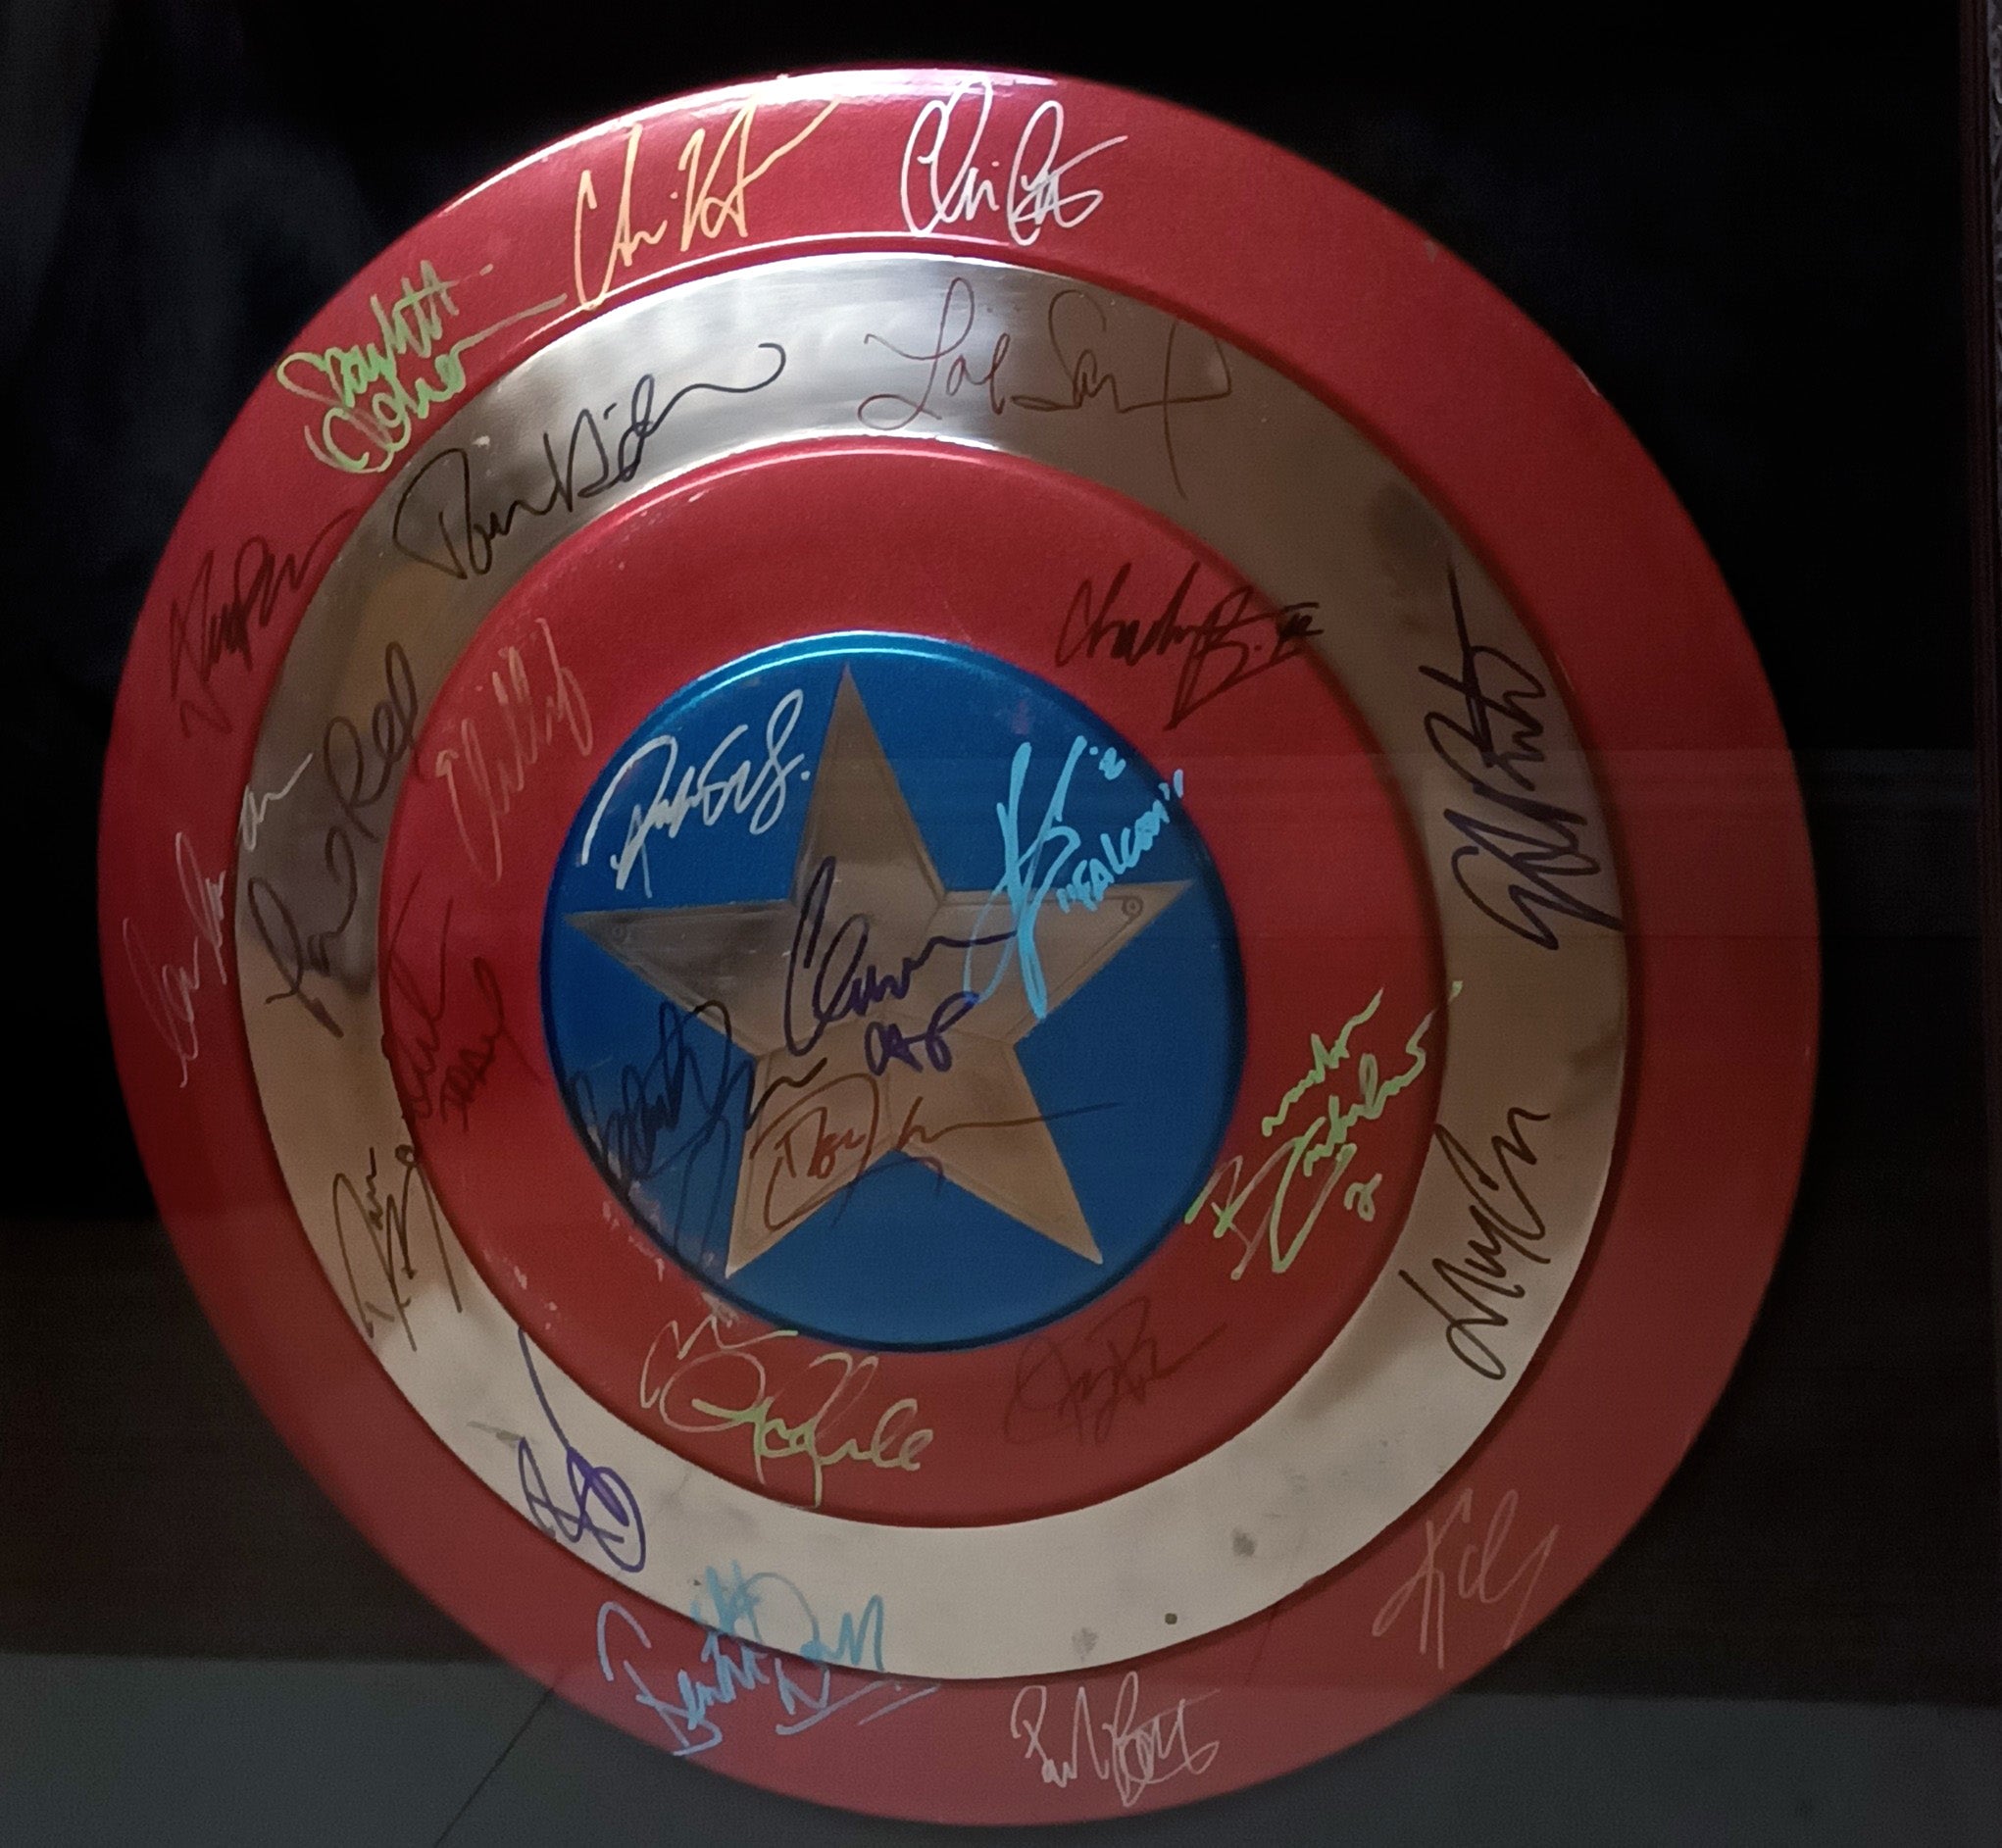 Avengers-Captain America metal shield Chris Evans, Scarlett Johansson, Robert Downey Jr. 20 plus signatures signed and framed with proof